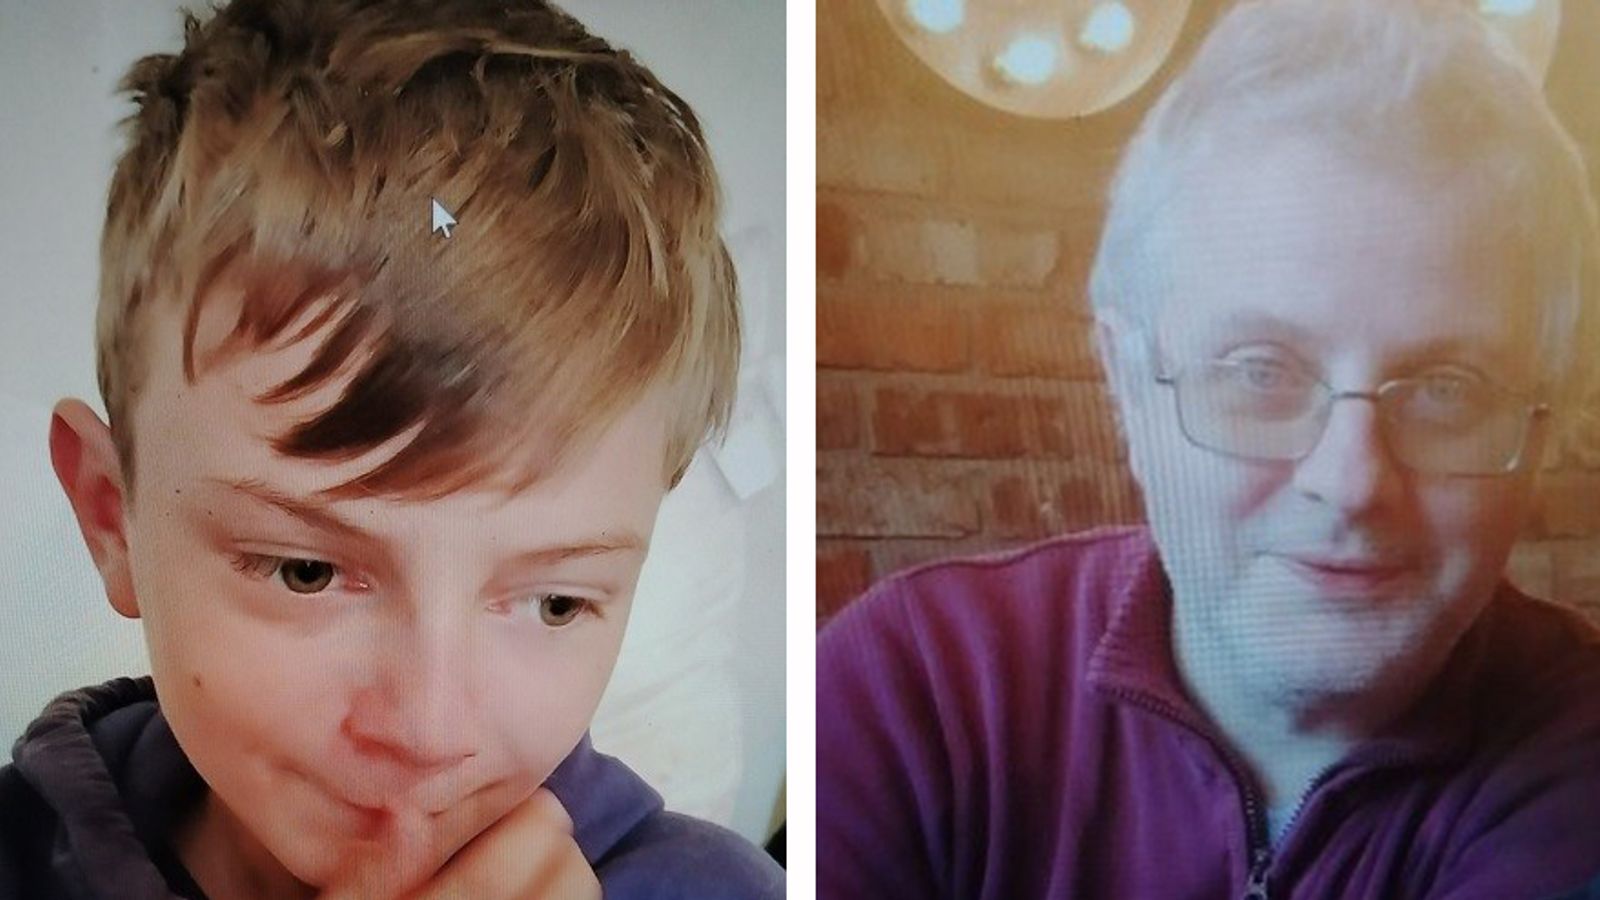 Scottish Highlands: Urgent search after father and son, 12, go missing on hike